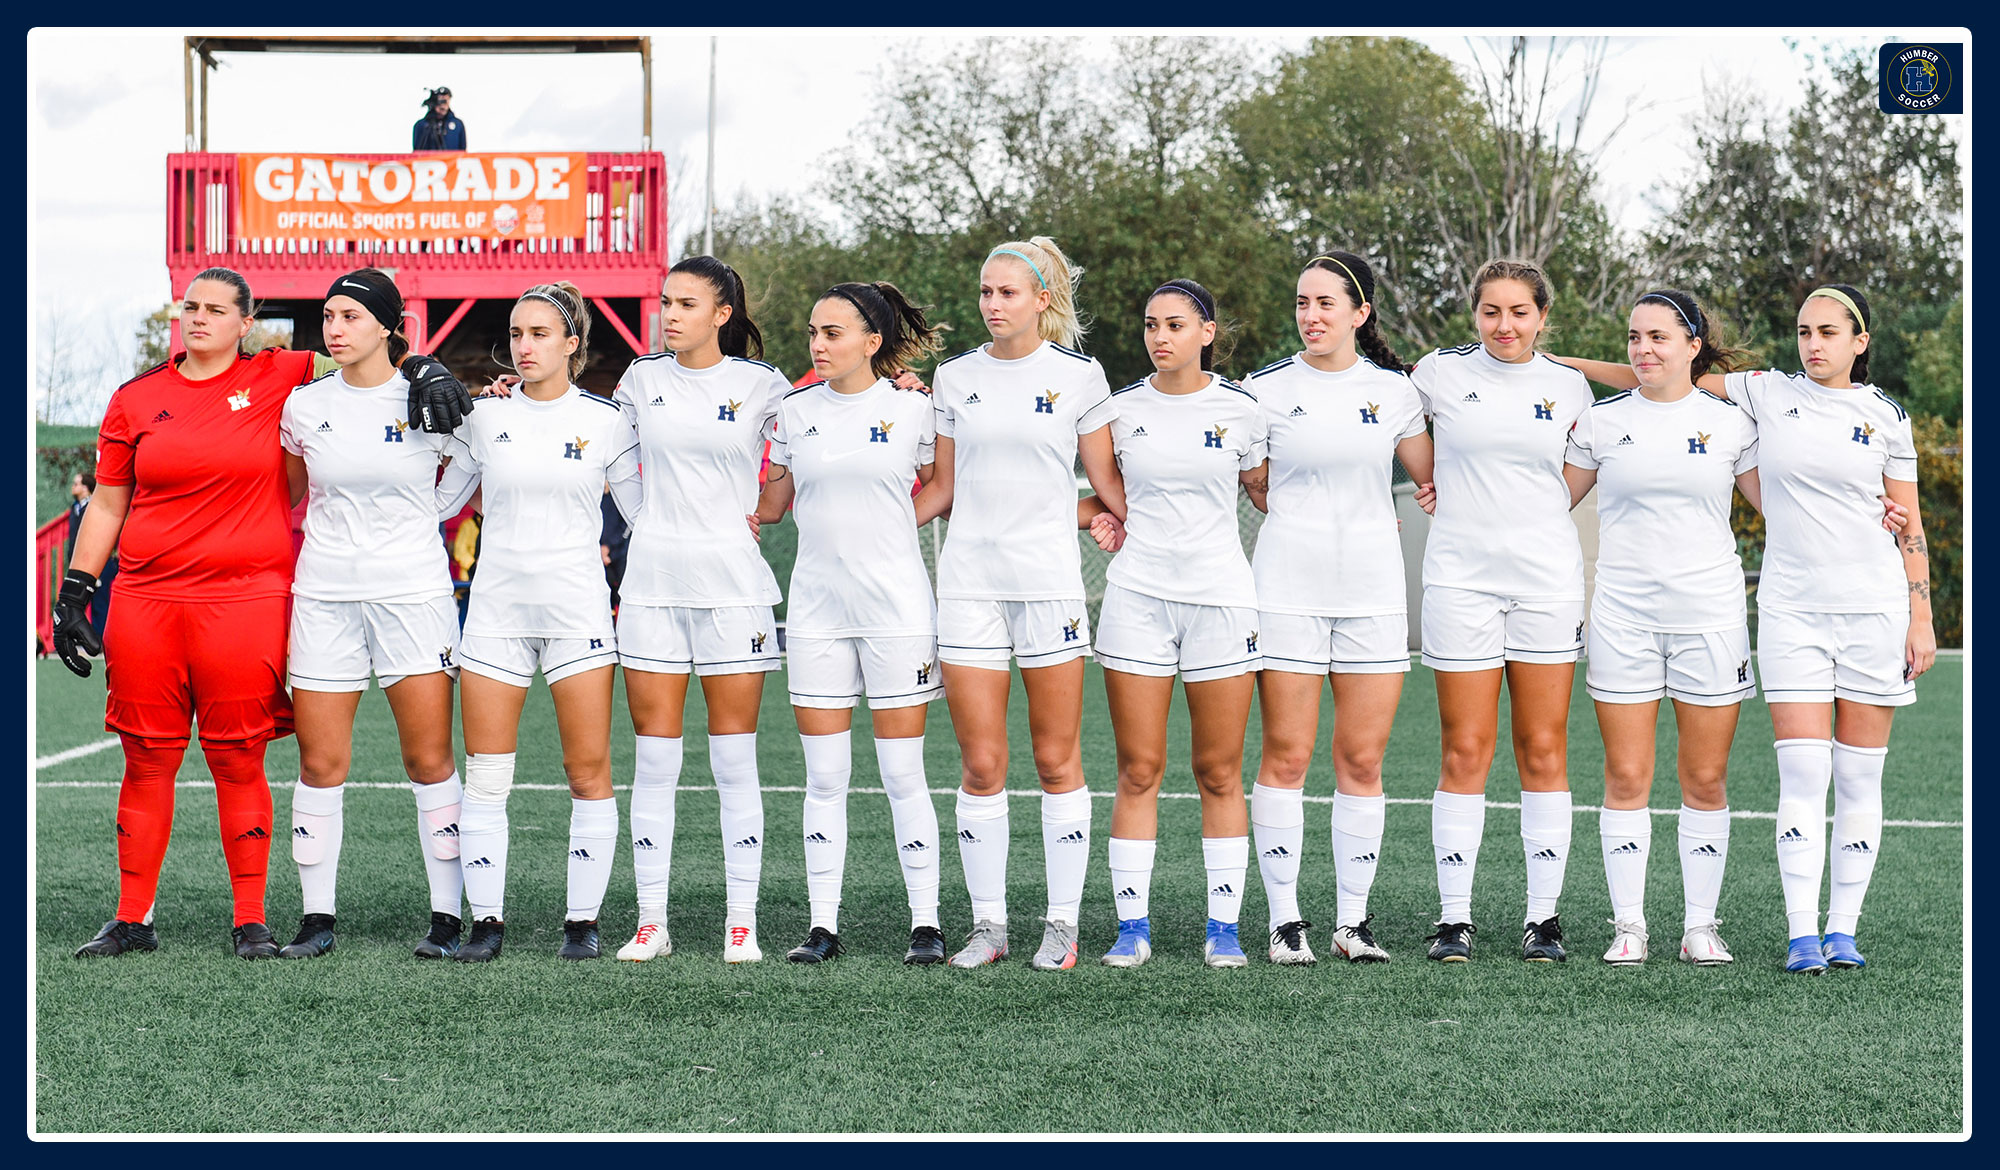 Humber women's soccer lines up before a match.